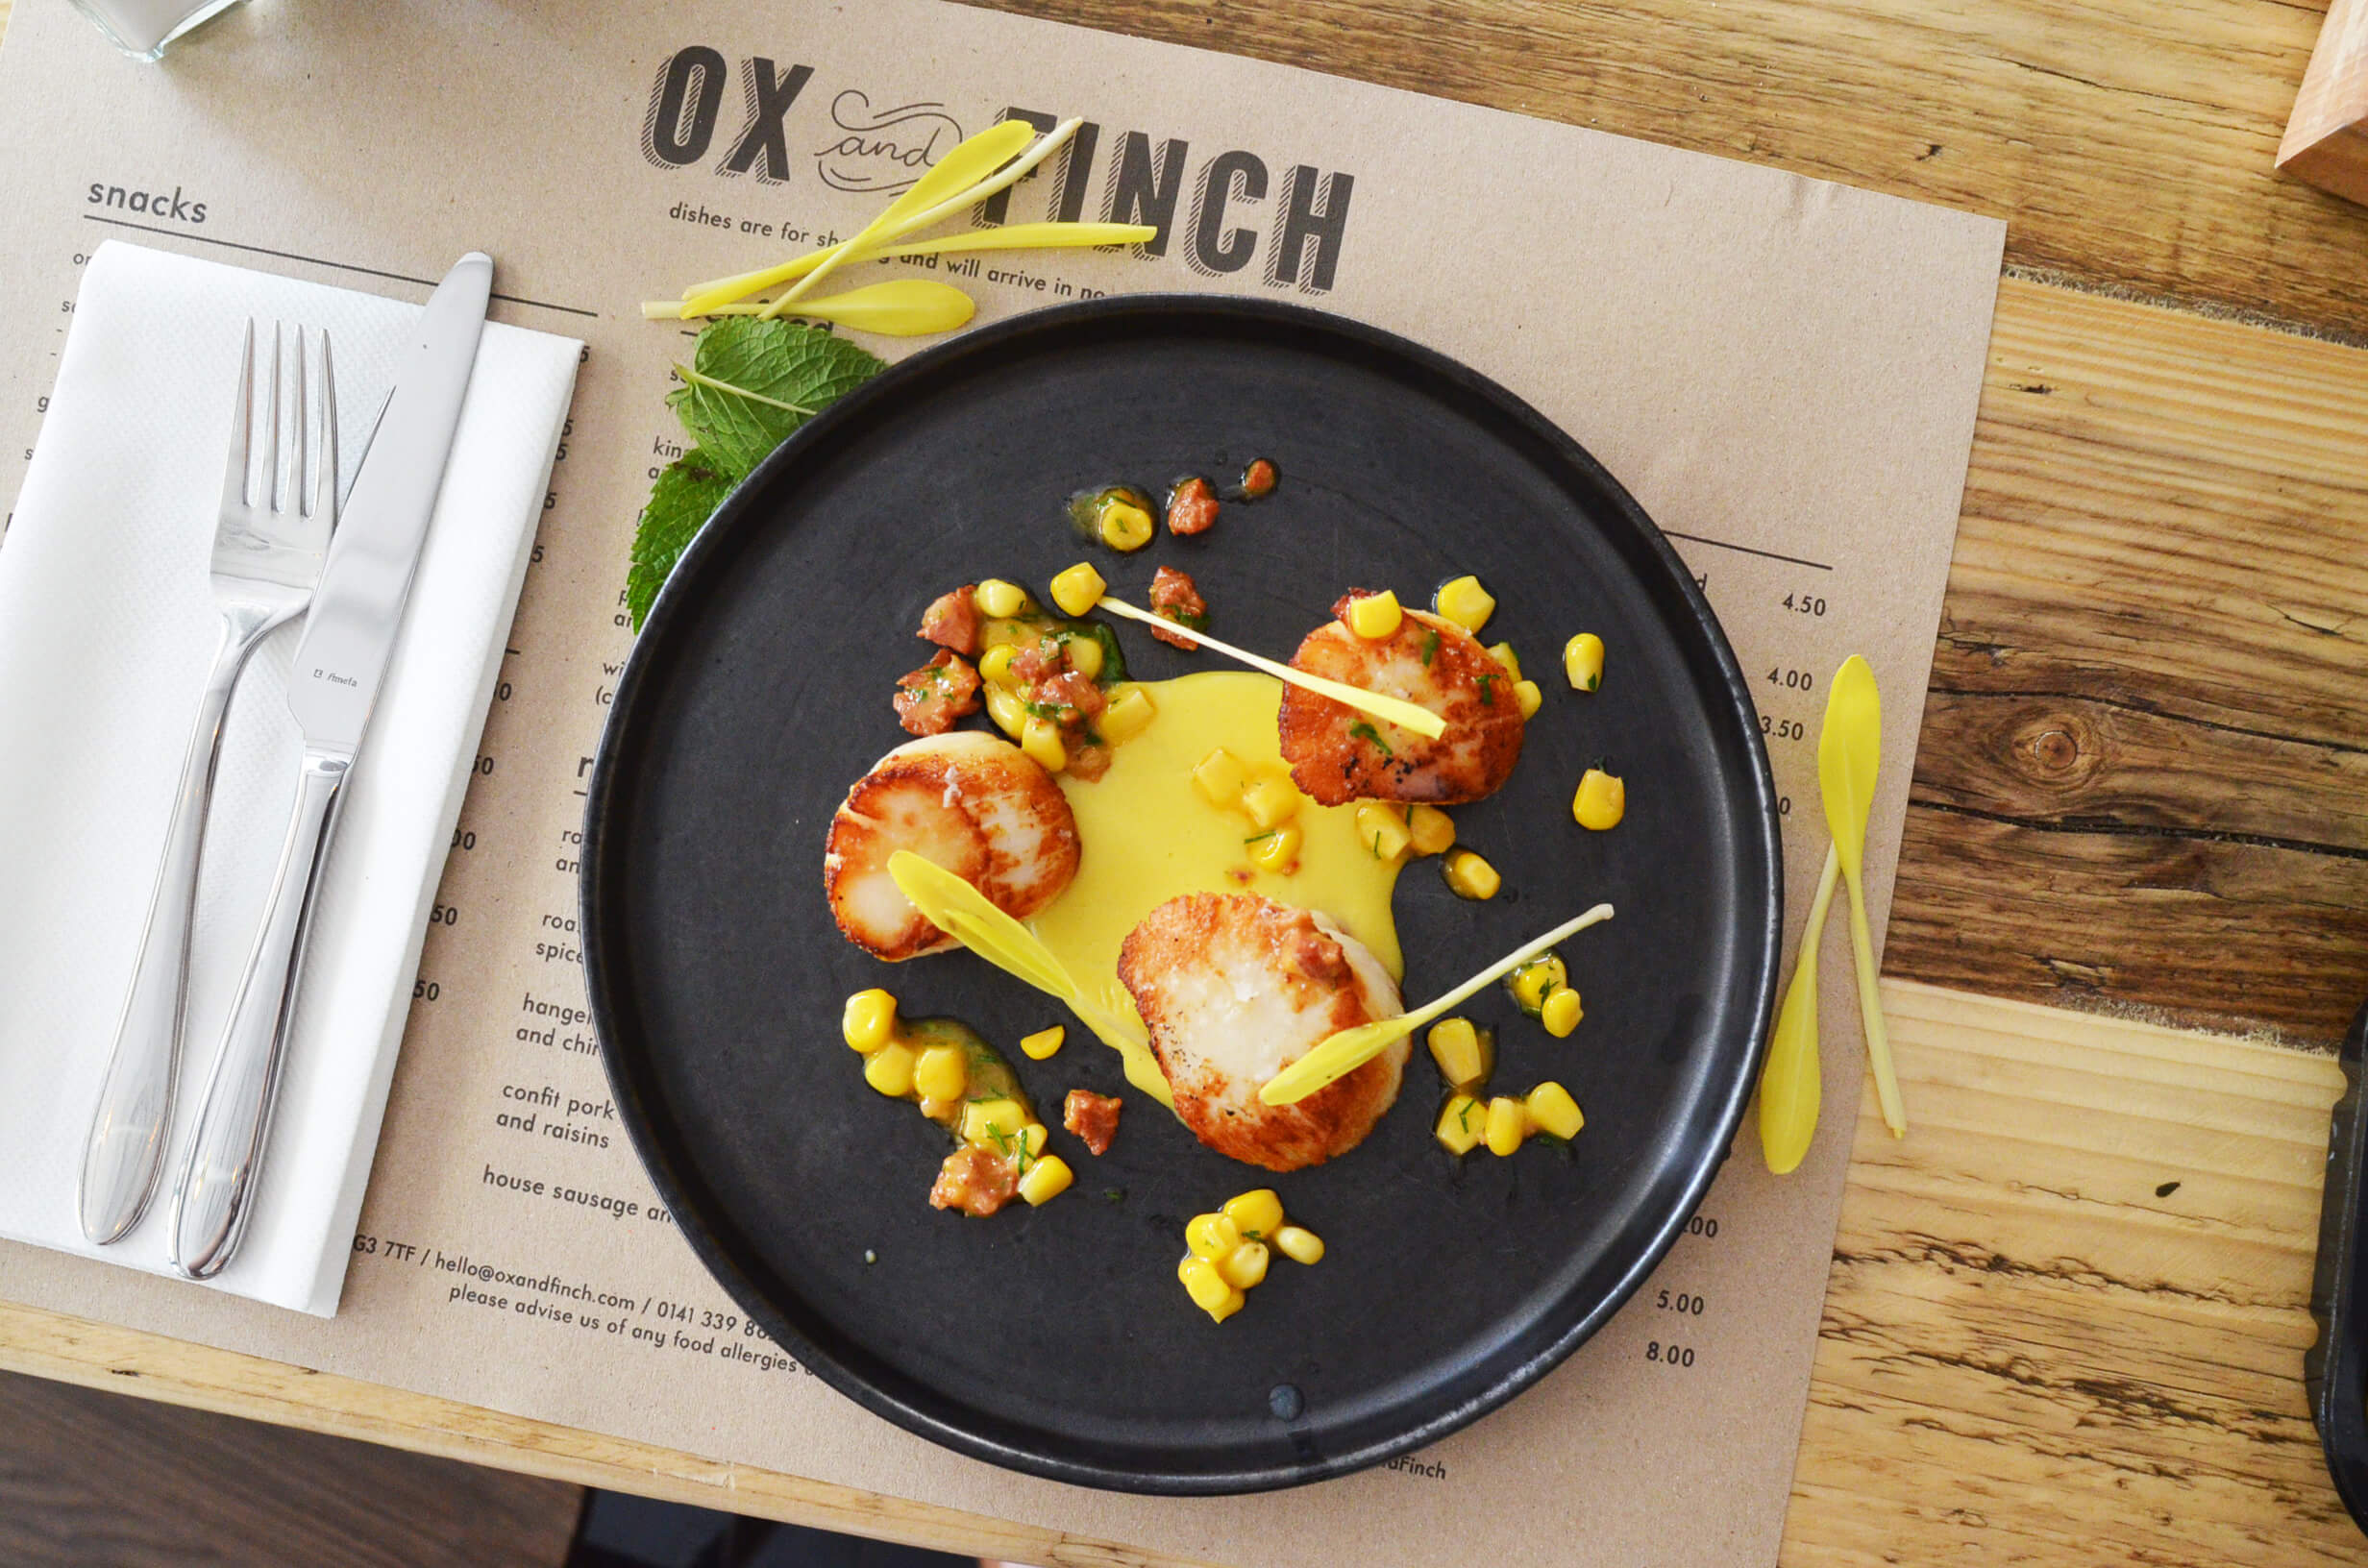 Ox and Finch - Food Shot #13